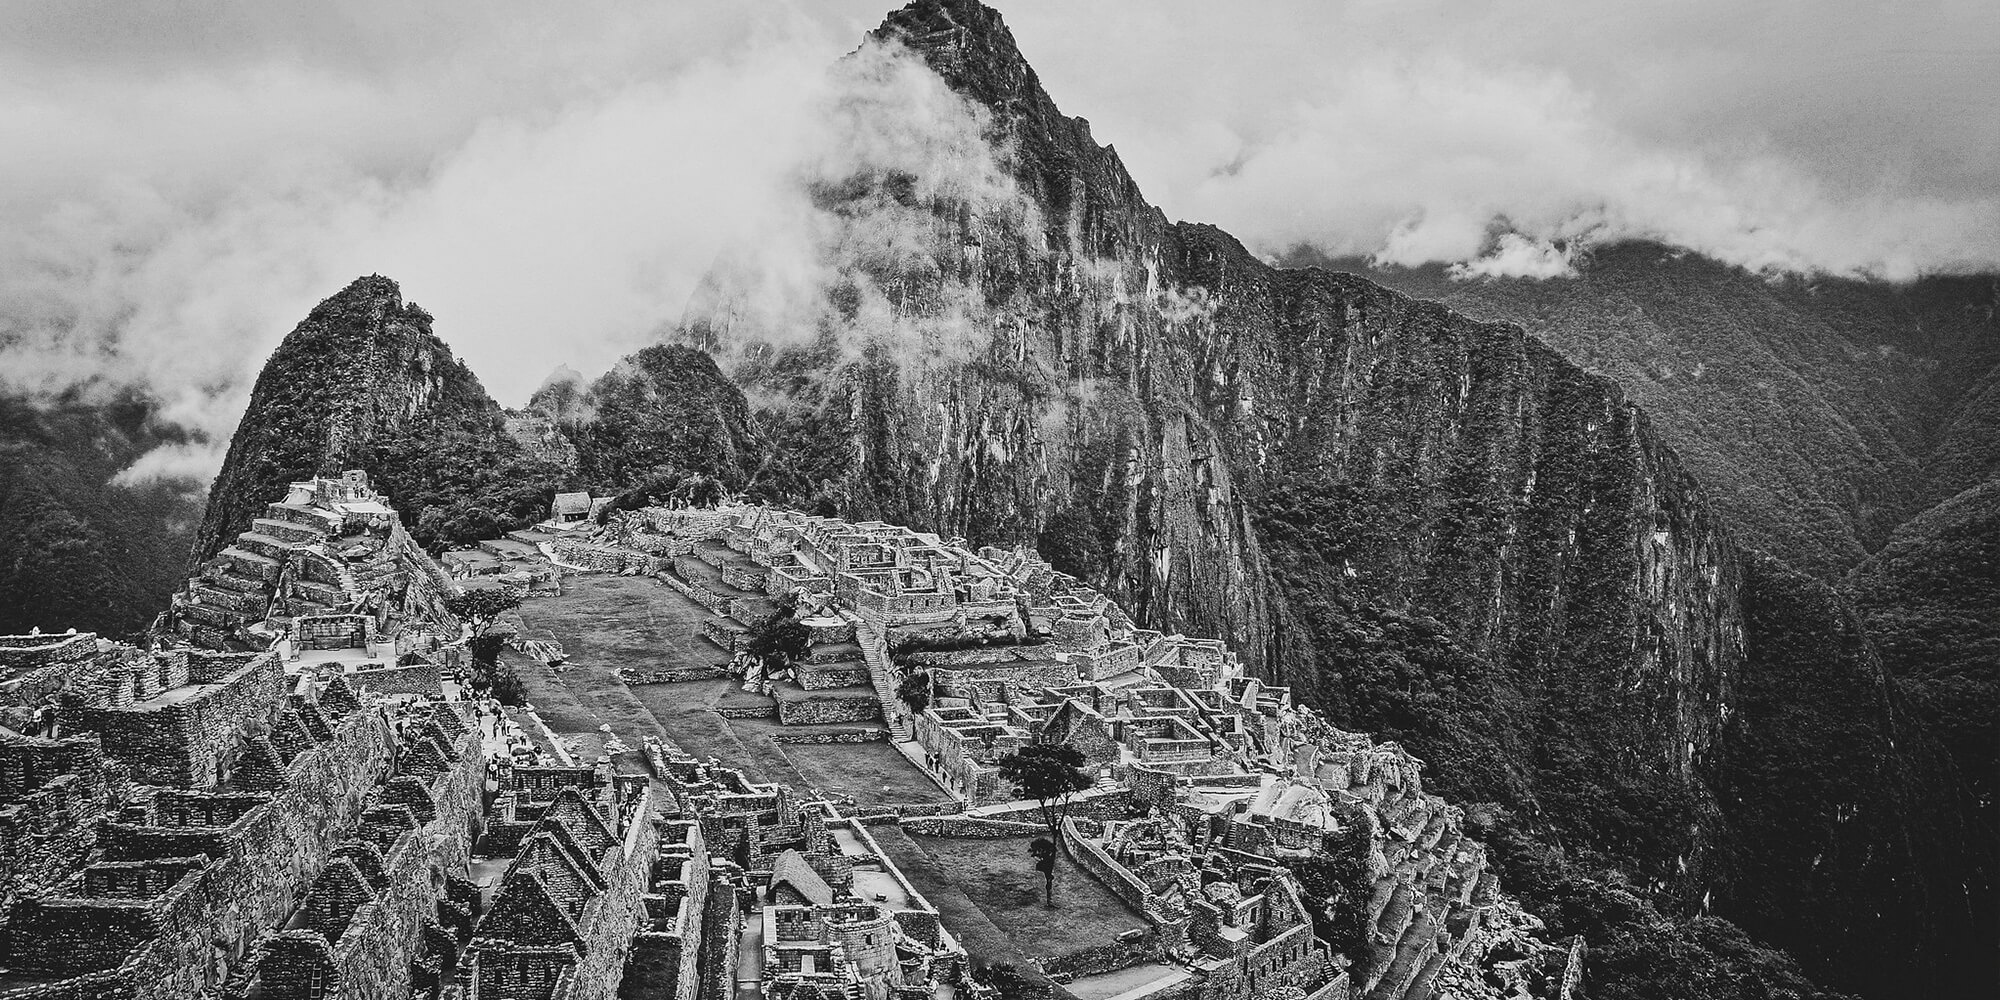 Machu Picchu Discovered Today in History